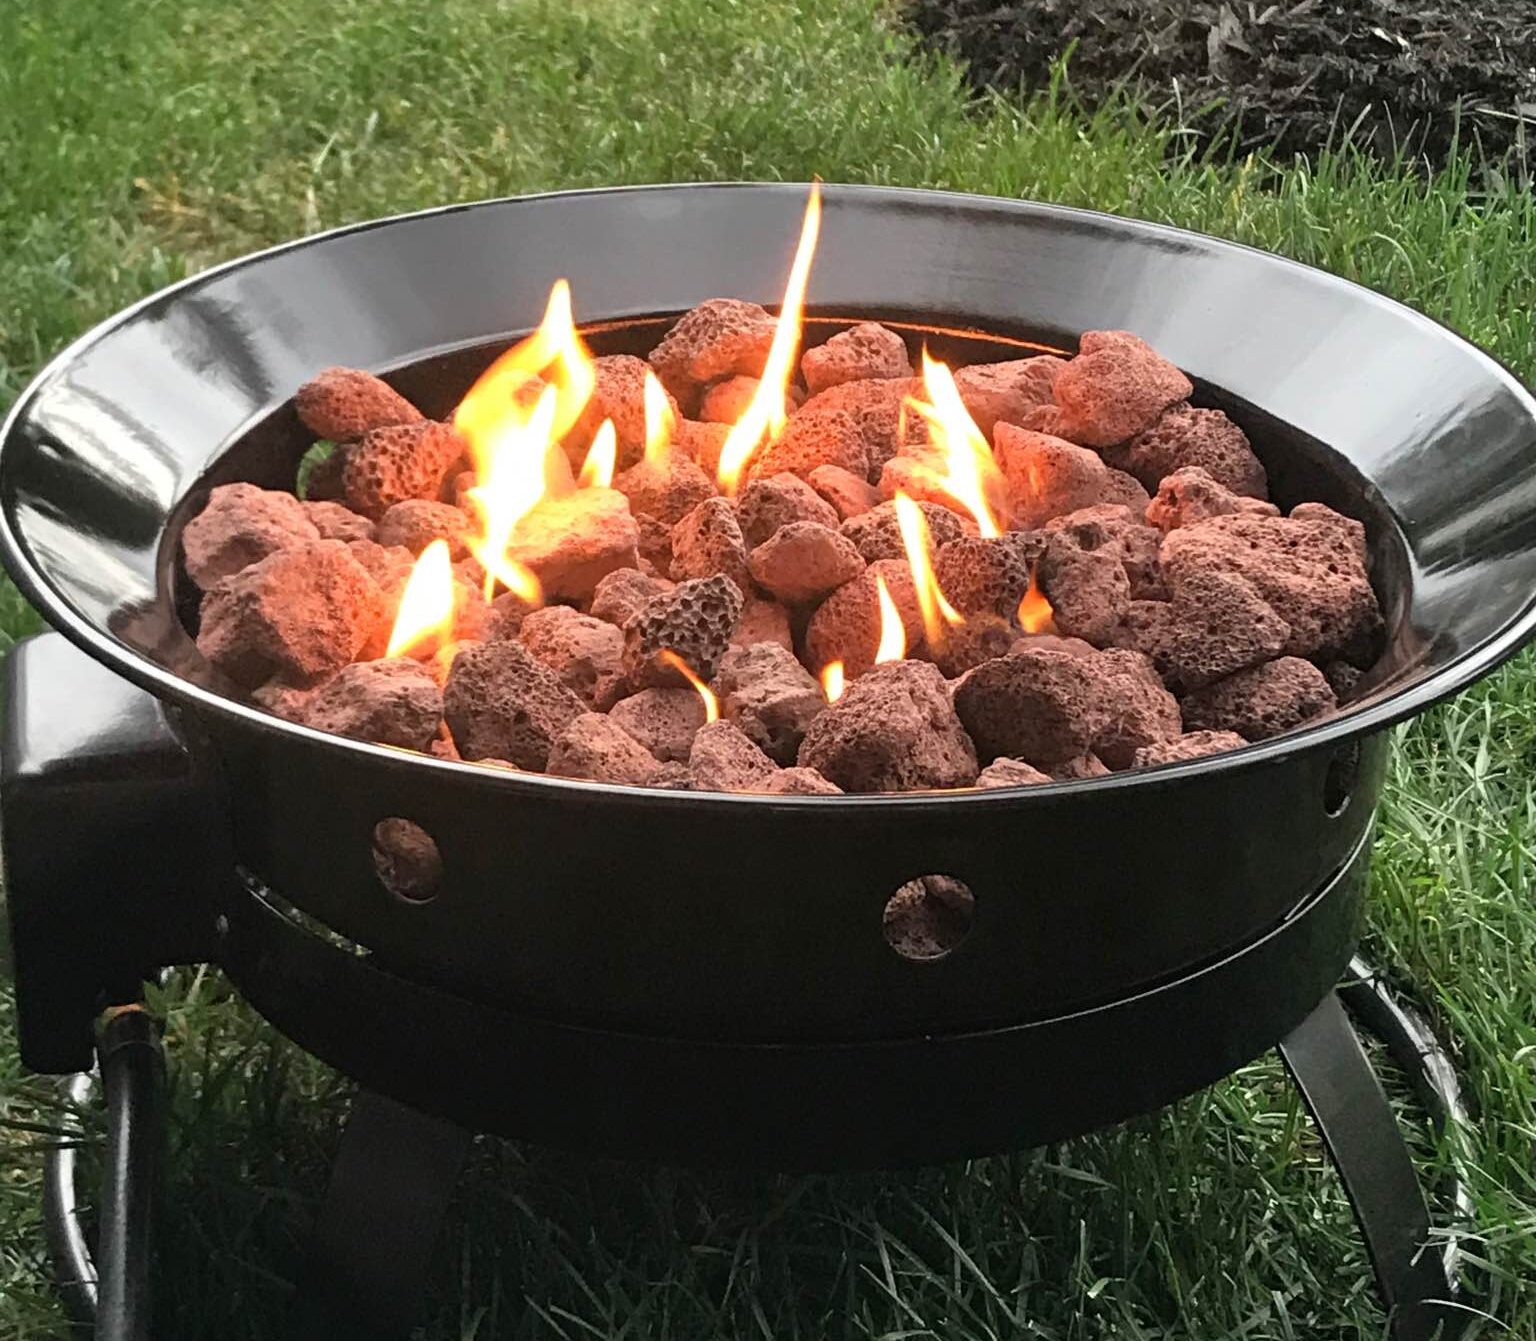 Portable Propane Fire Pits, Outdoor Camping Propane Fire Pit